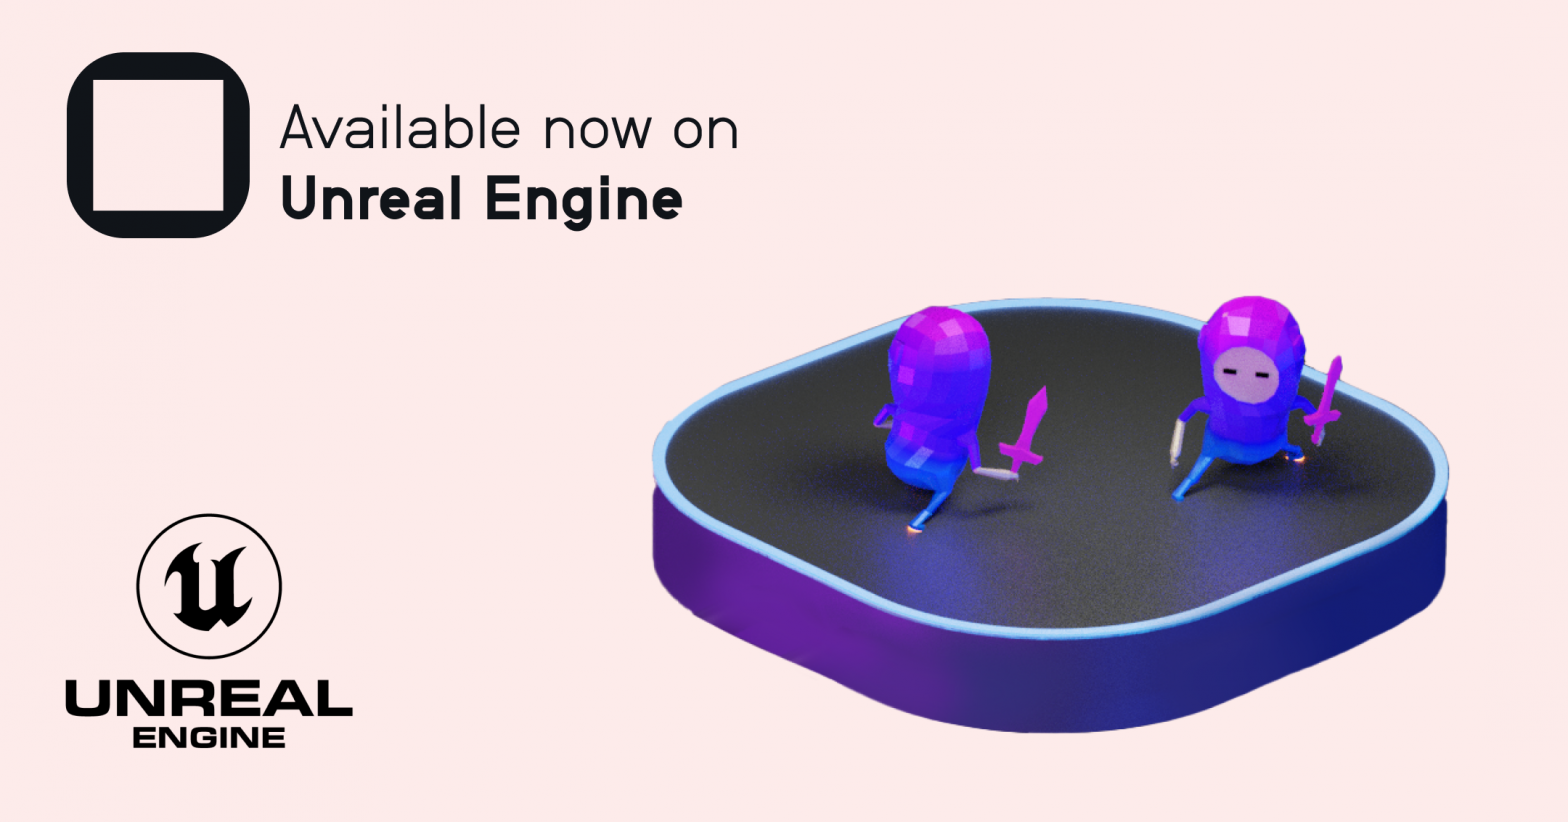 Available now on Unreal Engine